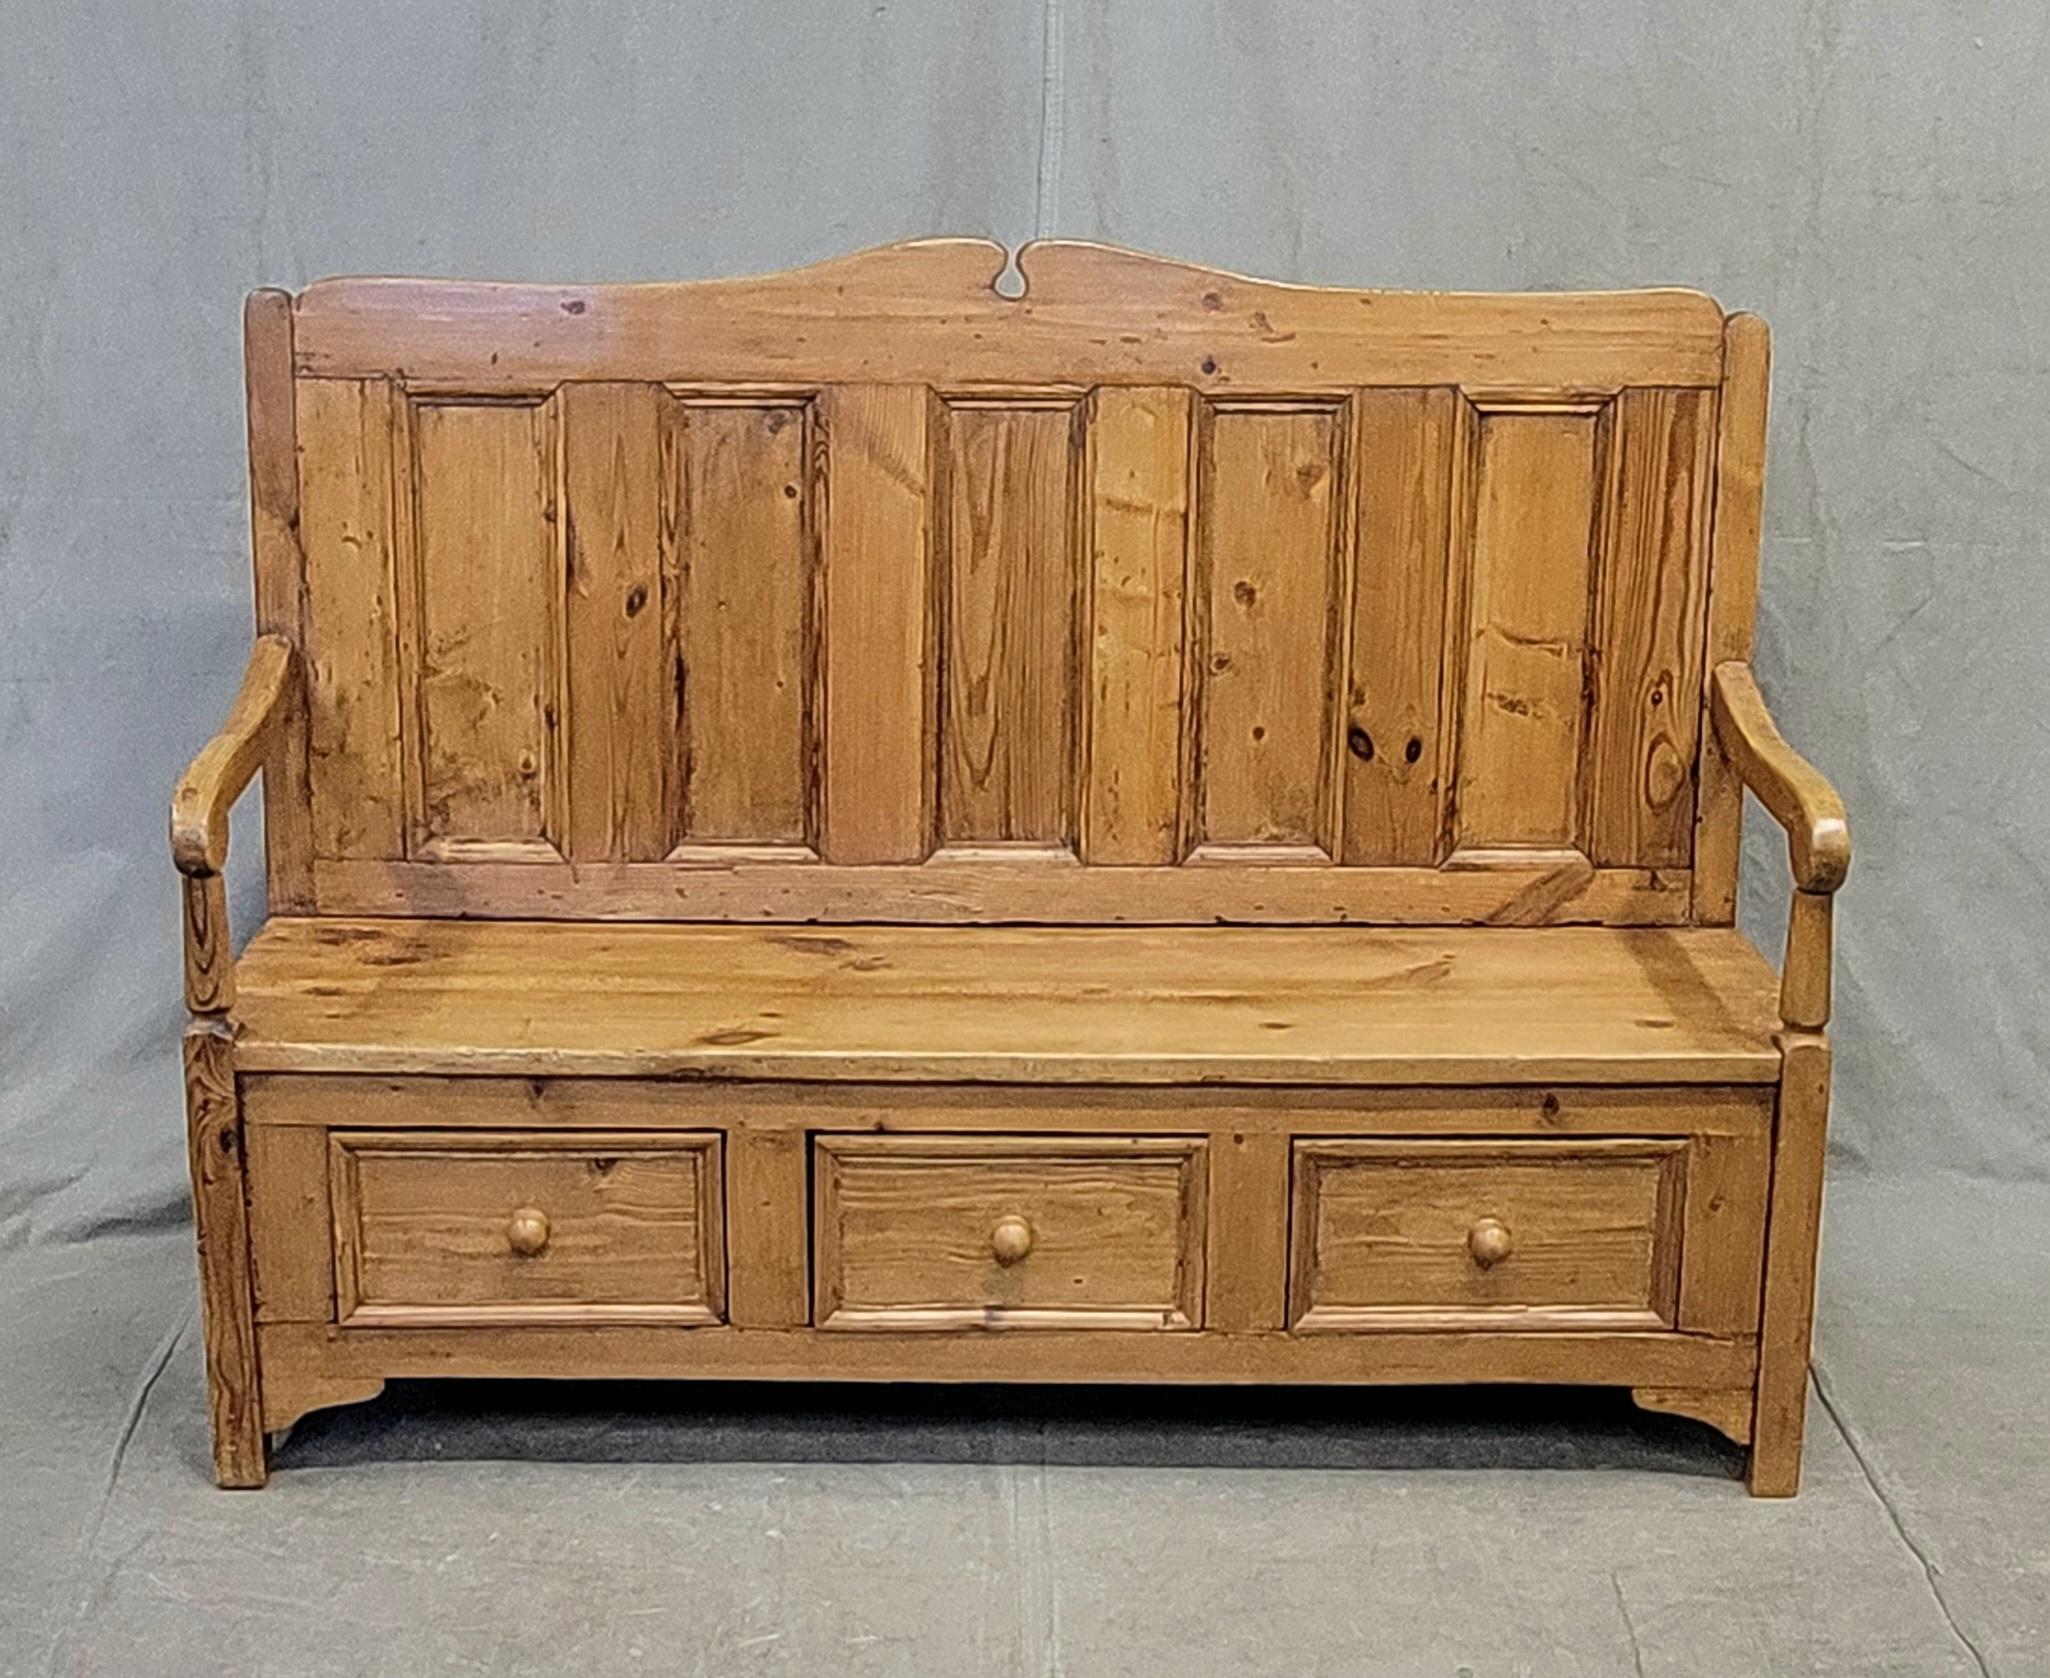 An absolutely beautiful rustic pine settle bench with three drawers made in Poland. Strong and sturdy, ready for many years of enjoyment. The waxed finish just glows! Use next to a pine farmhouse table for seating or in an entryway for sitting down